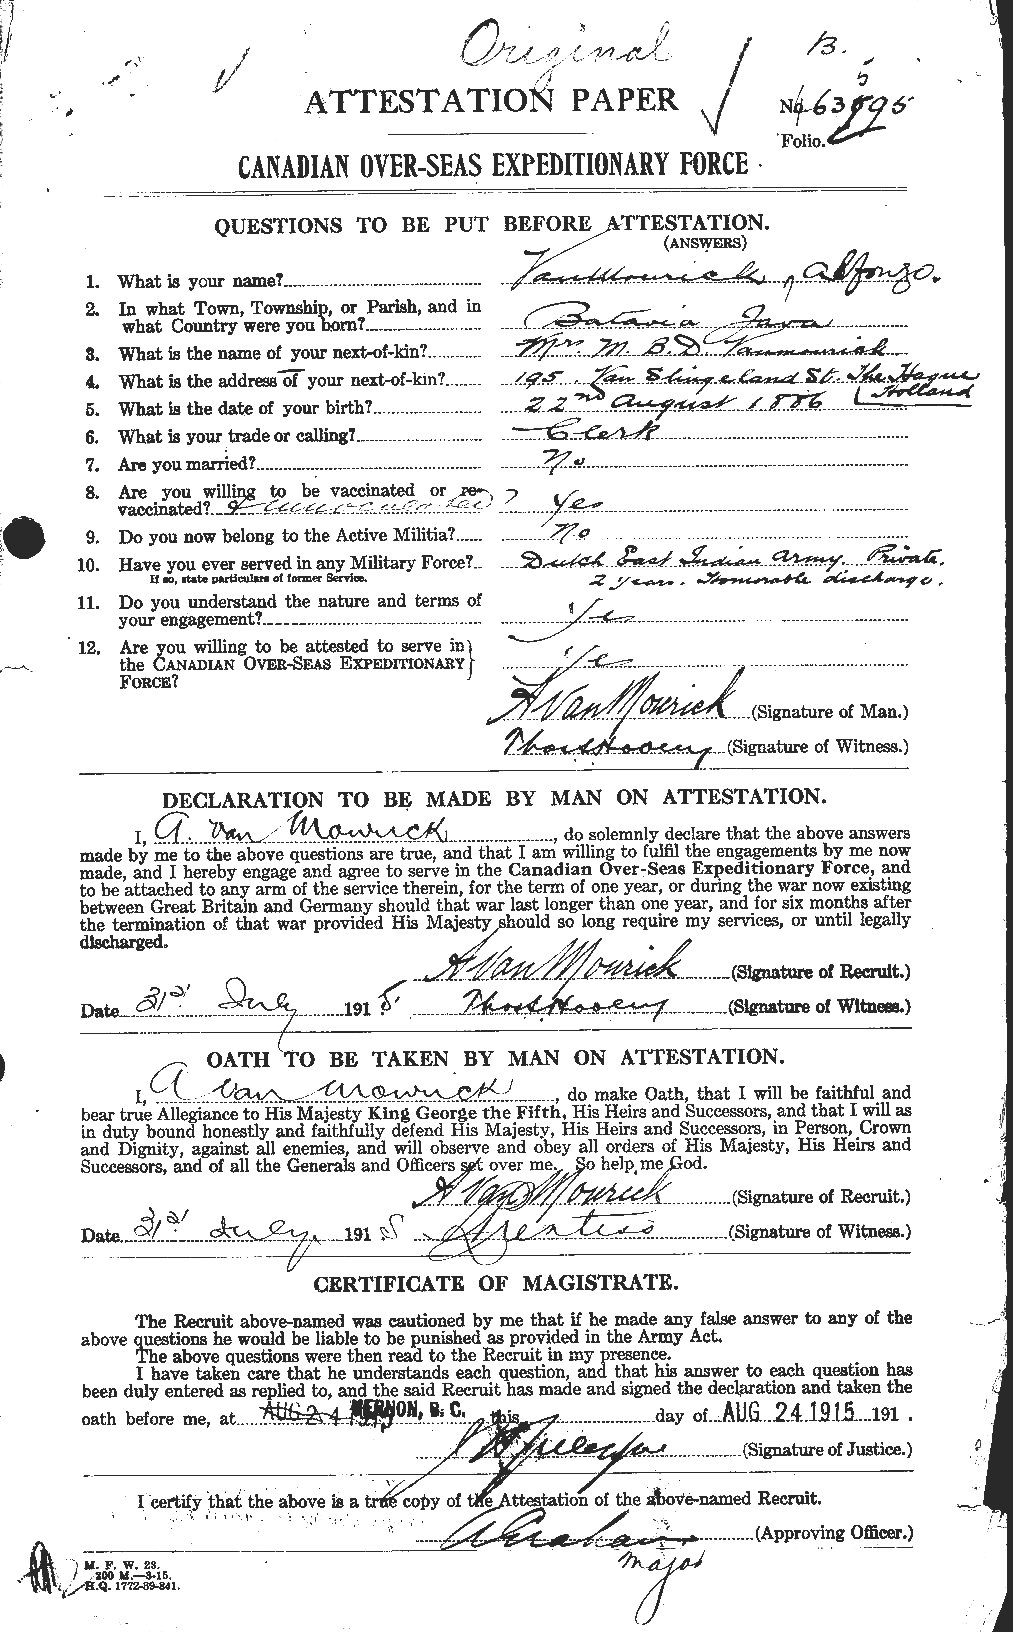 Personnel Records of the First World War - CEF 648785a